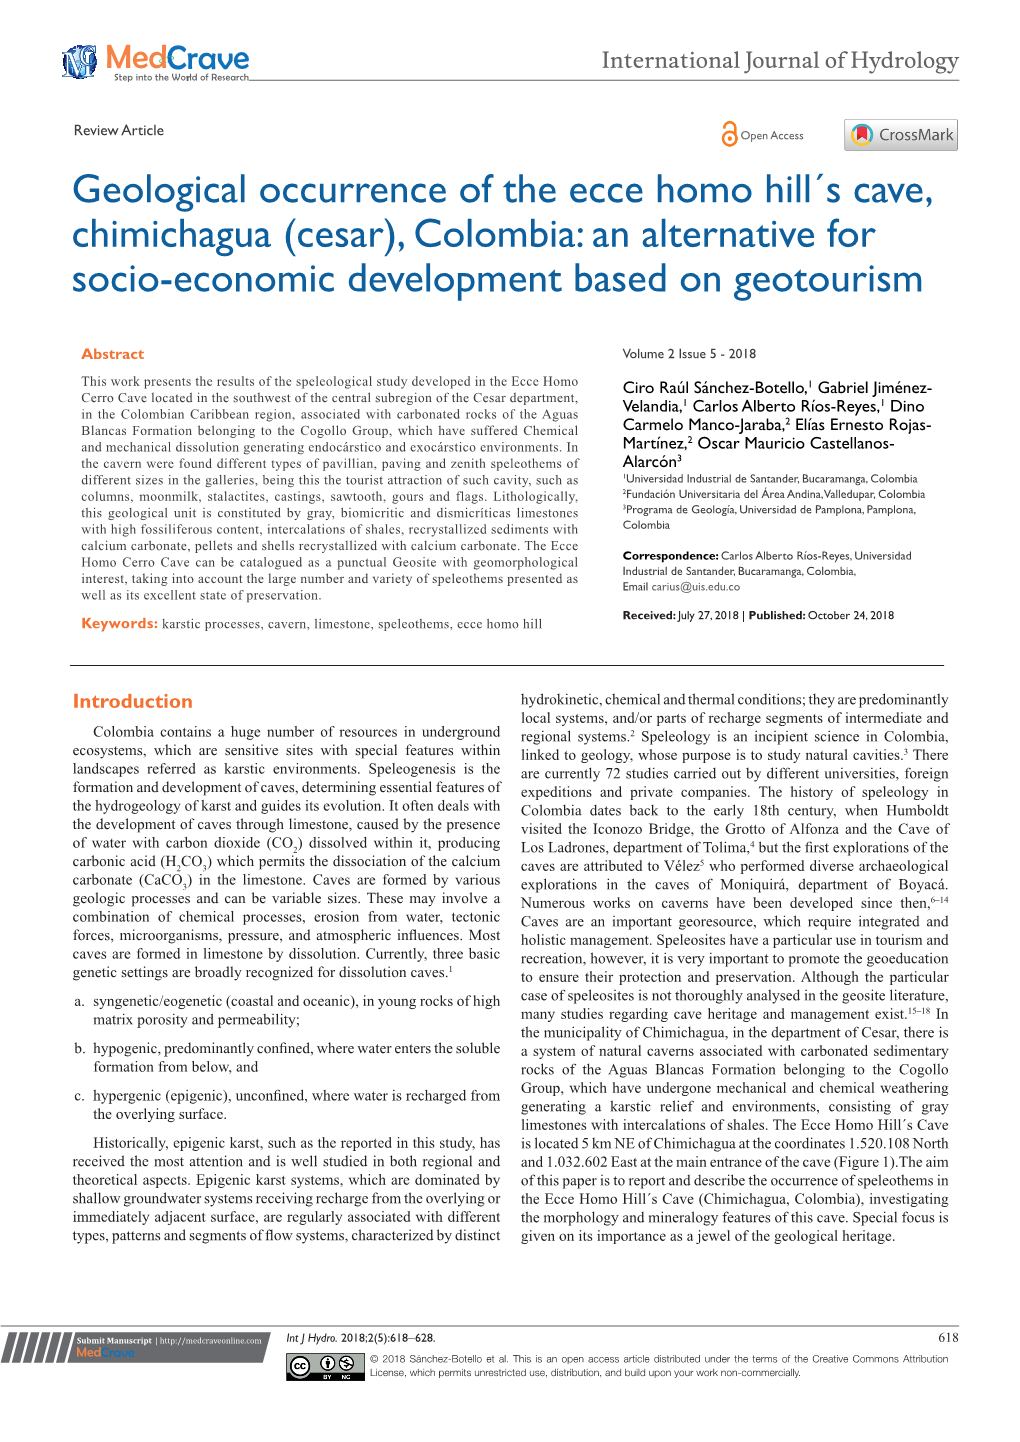 Geological Occurrence of the Ecce Homo Hill´S Cave, Chimichagua (Cesar), Colombia: an Alternative for Socio-Economic Development Based on Geotourism